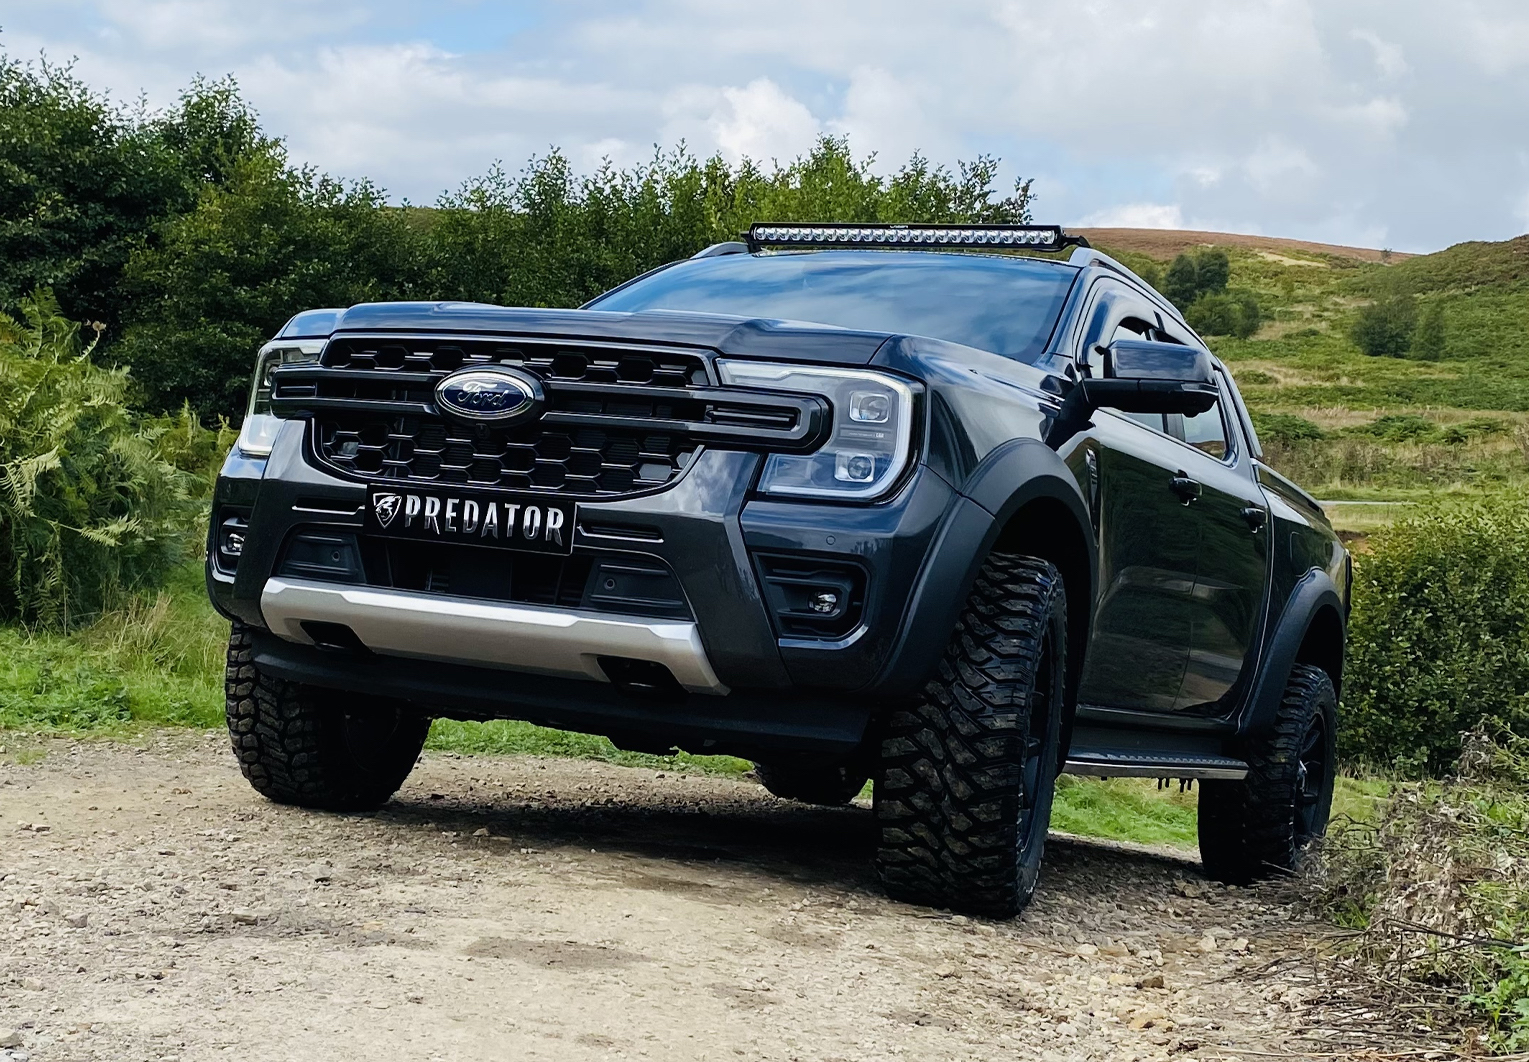 Next Gen Ford Ranger Accessories Fitted photos Yorkshire Dales UK